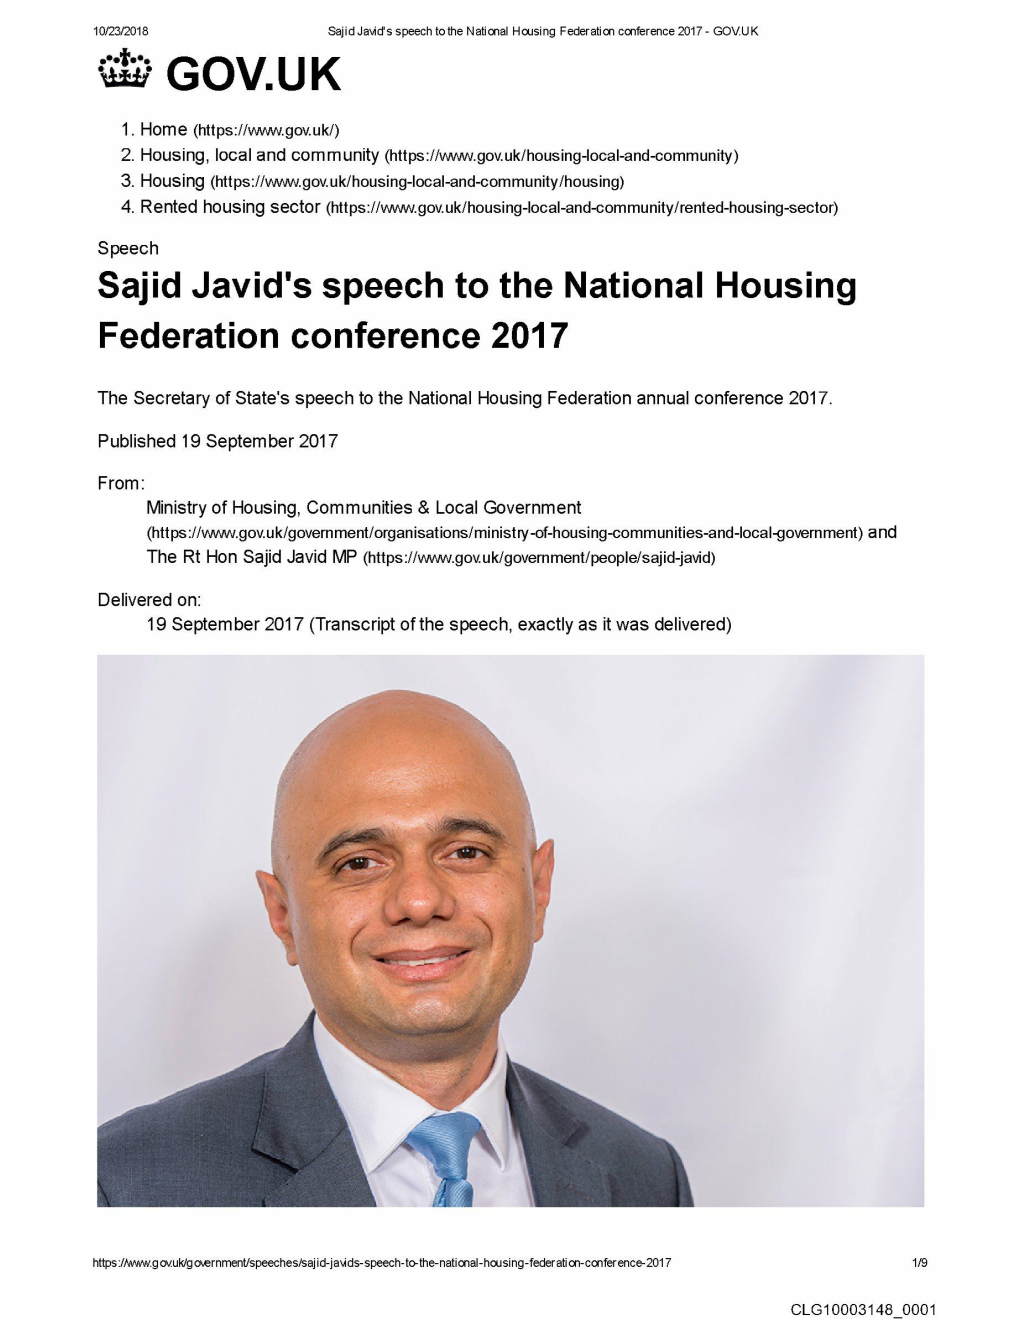 45. the Secretary of State Sajid Javid Announcement of a Green Paper on Social Housing In